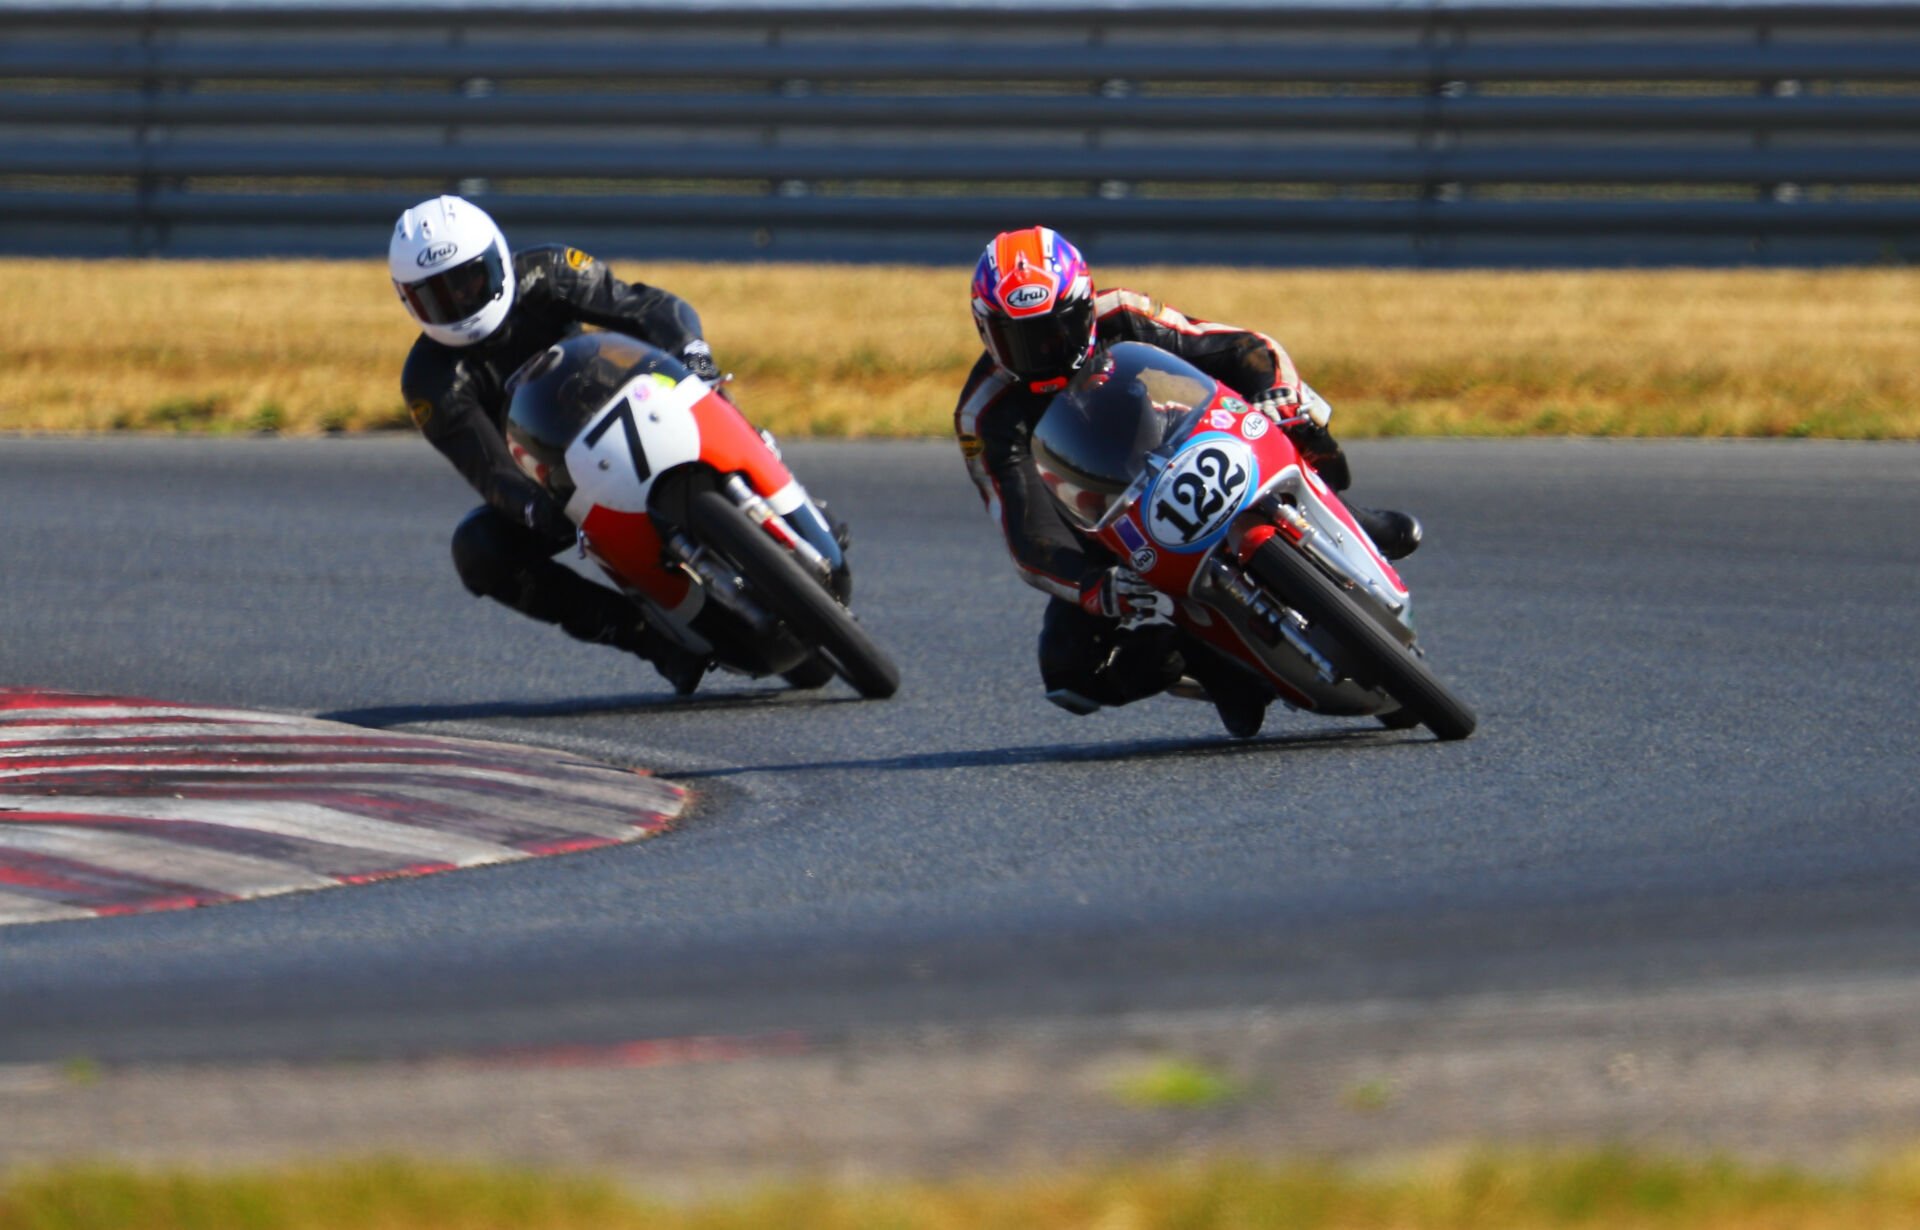 AHRMA racers Alex McLean (122) and Dave Roper (7) in action at NJMP in 2018. Photo by etechphoto.com, courtesy AHRMA.